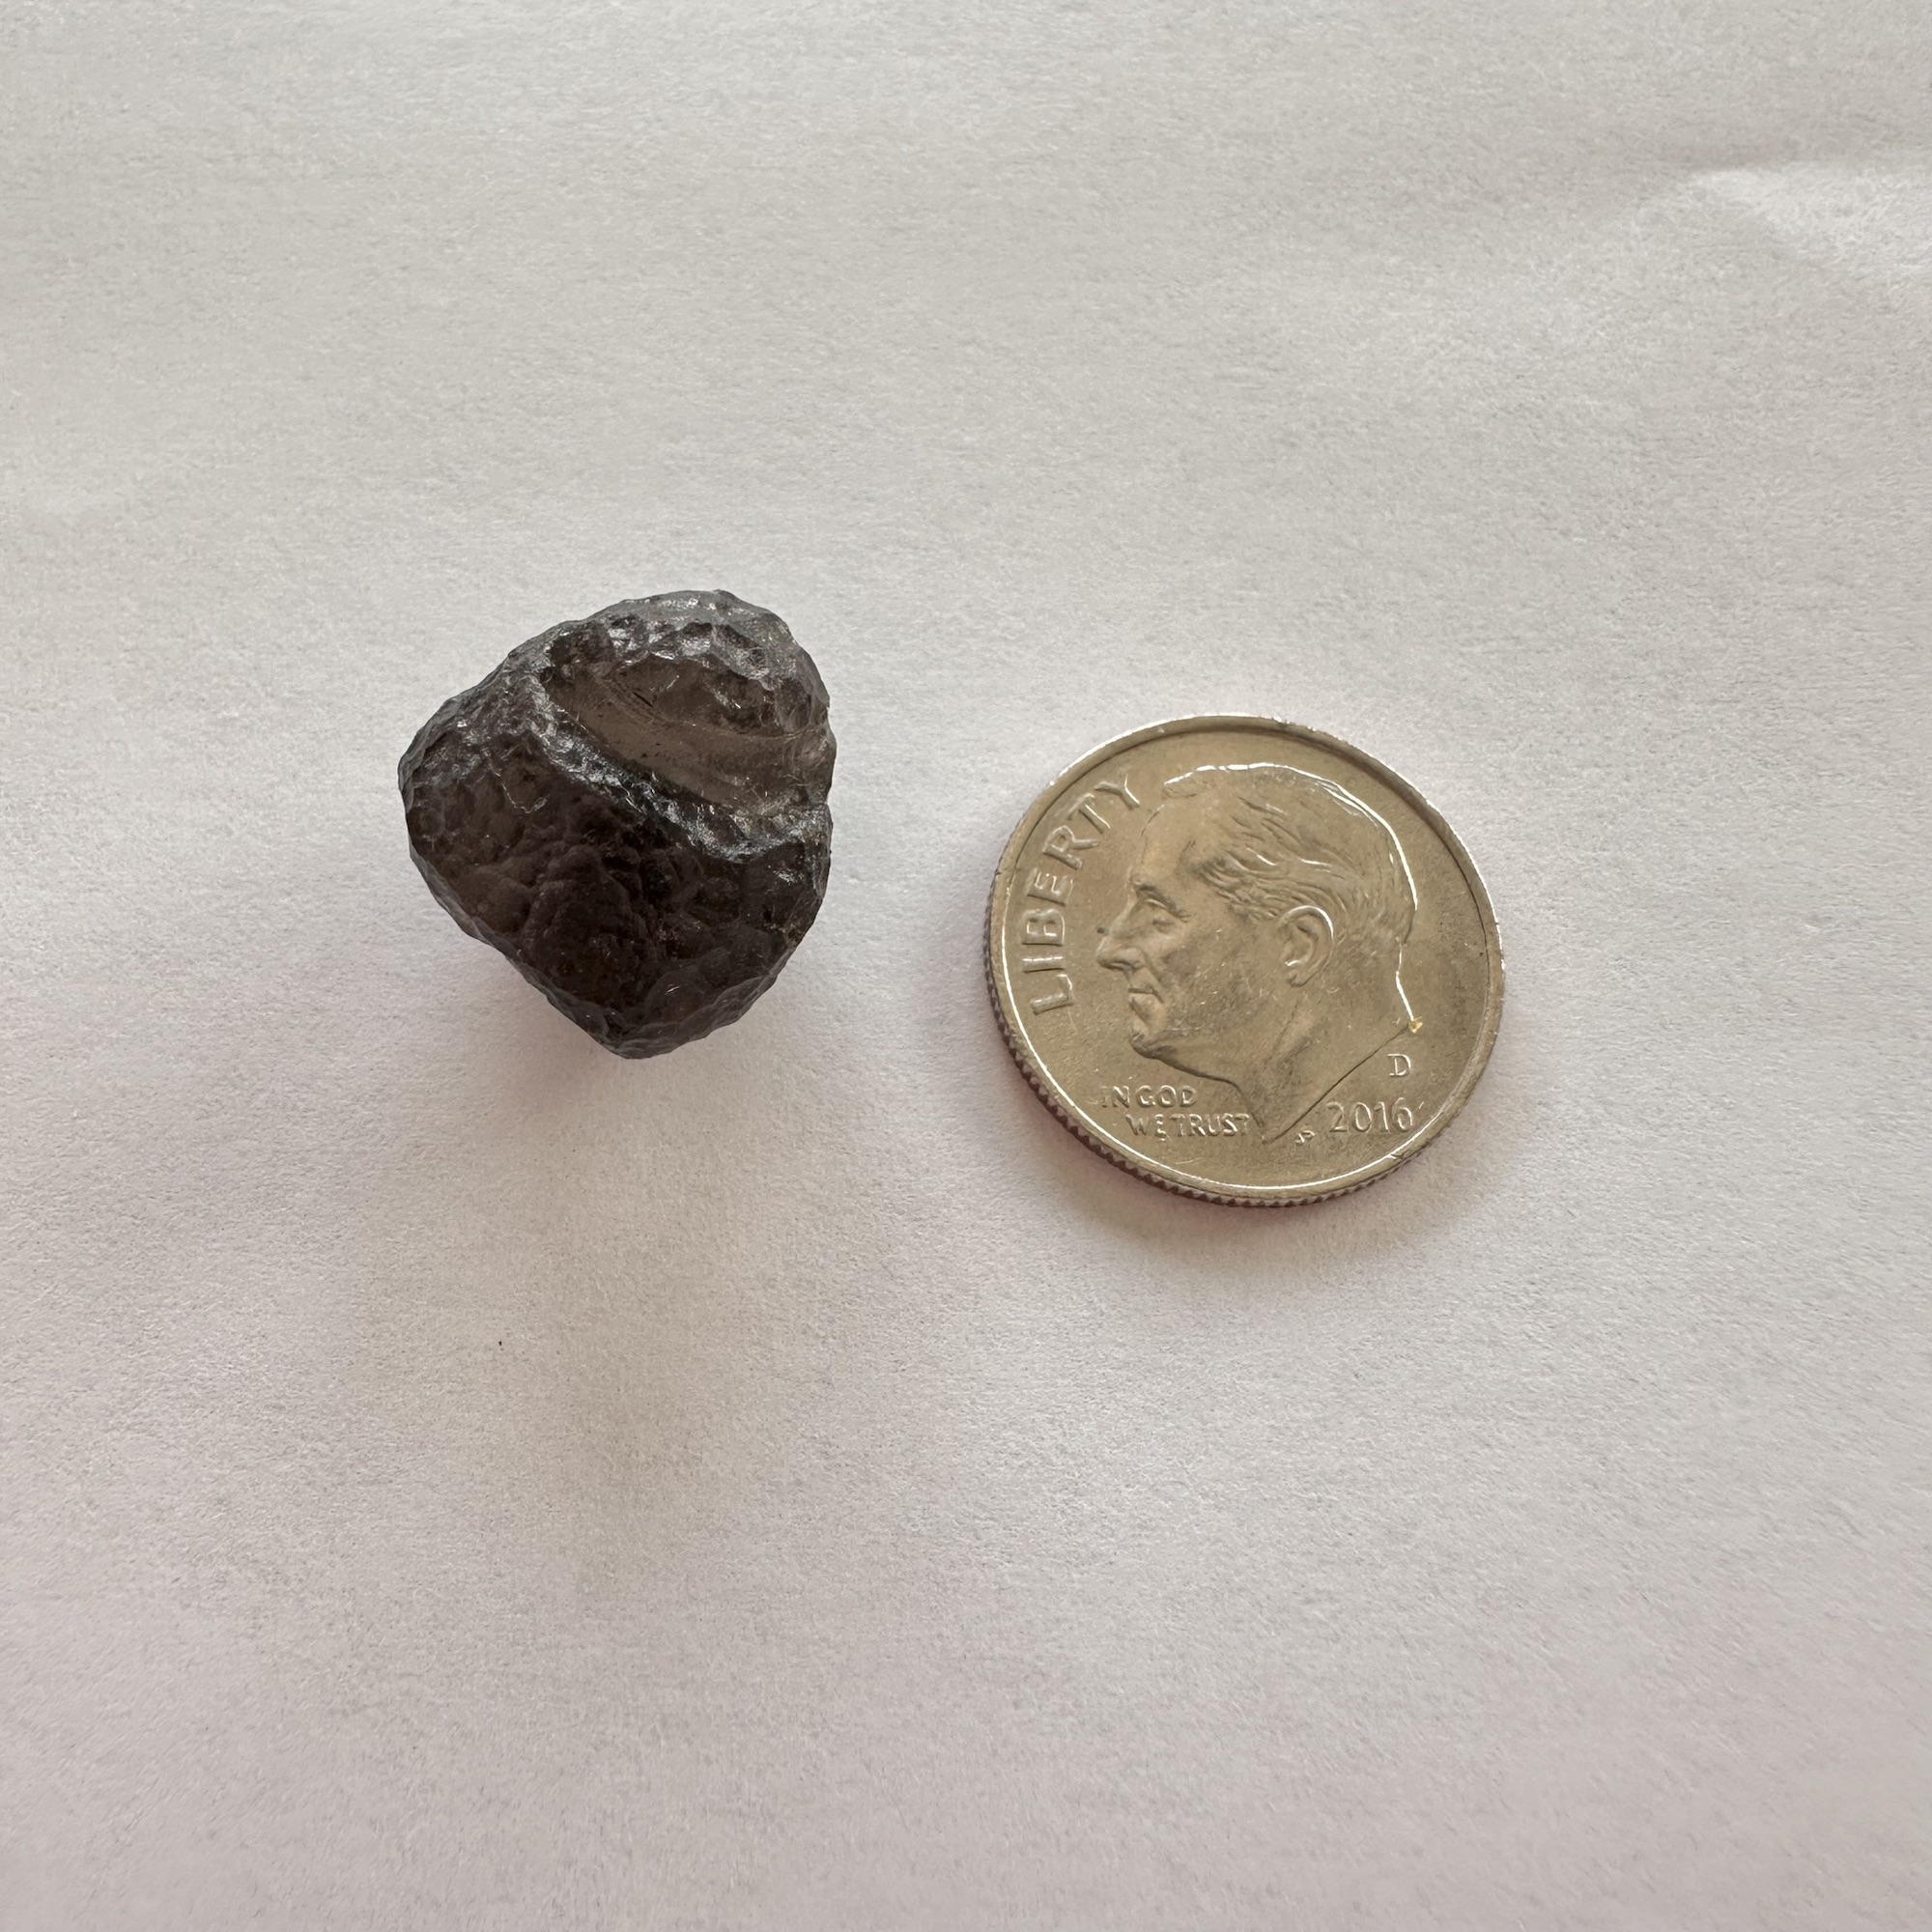 Colombianite from Colombia, great dimple shows the inner gas bubbles on this fabulous tektite